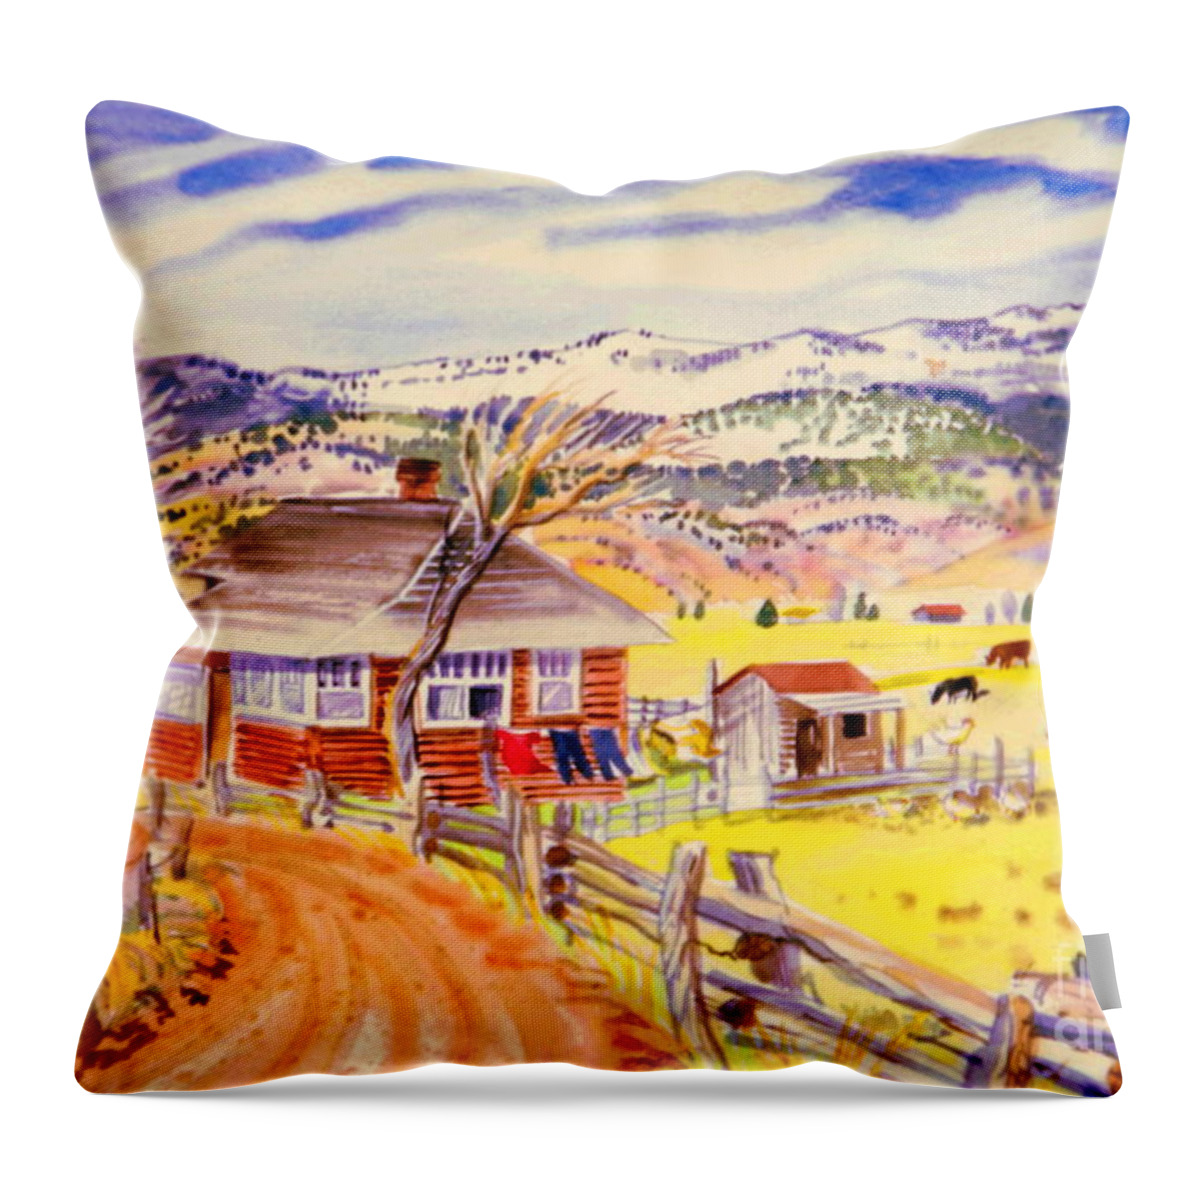  Old Log House On Ranch In Colorado Mountains Throw Pillow featuring the painting Old log house Gyspum Creek by Annie Gibbons